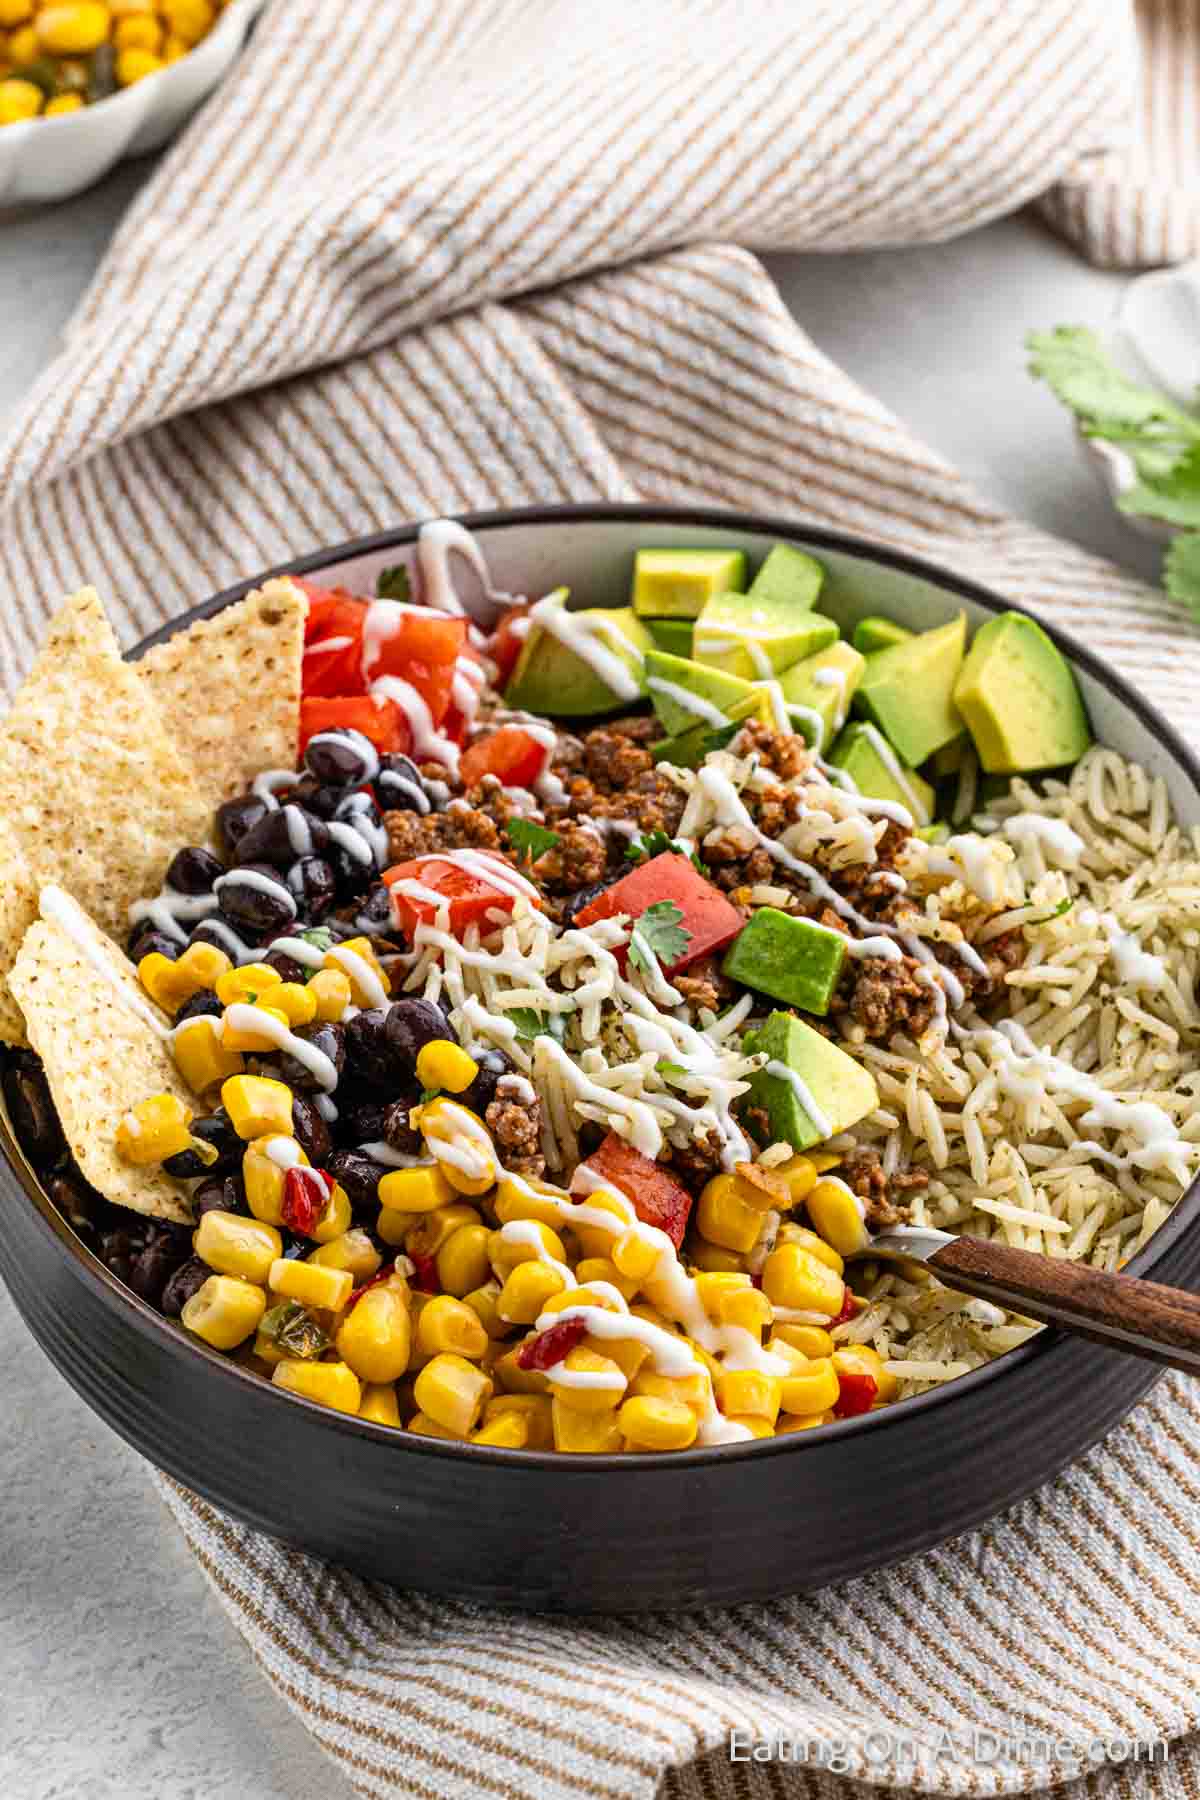 Taco Bowl topped with slice avocados sour cream corn salsa and tortilla chips